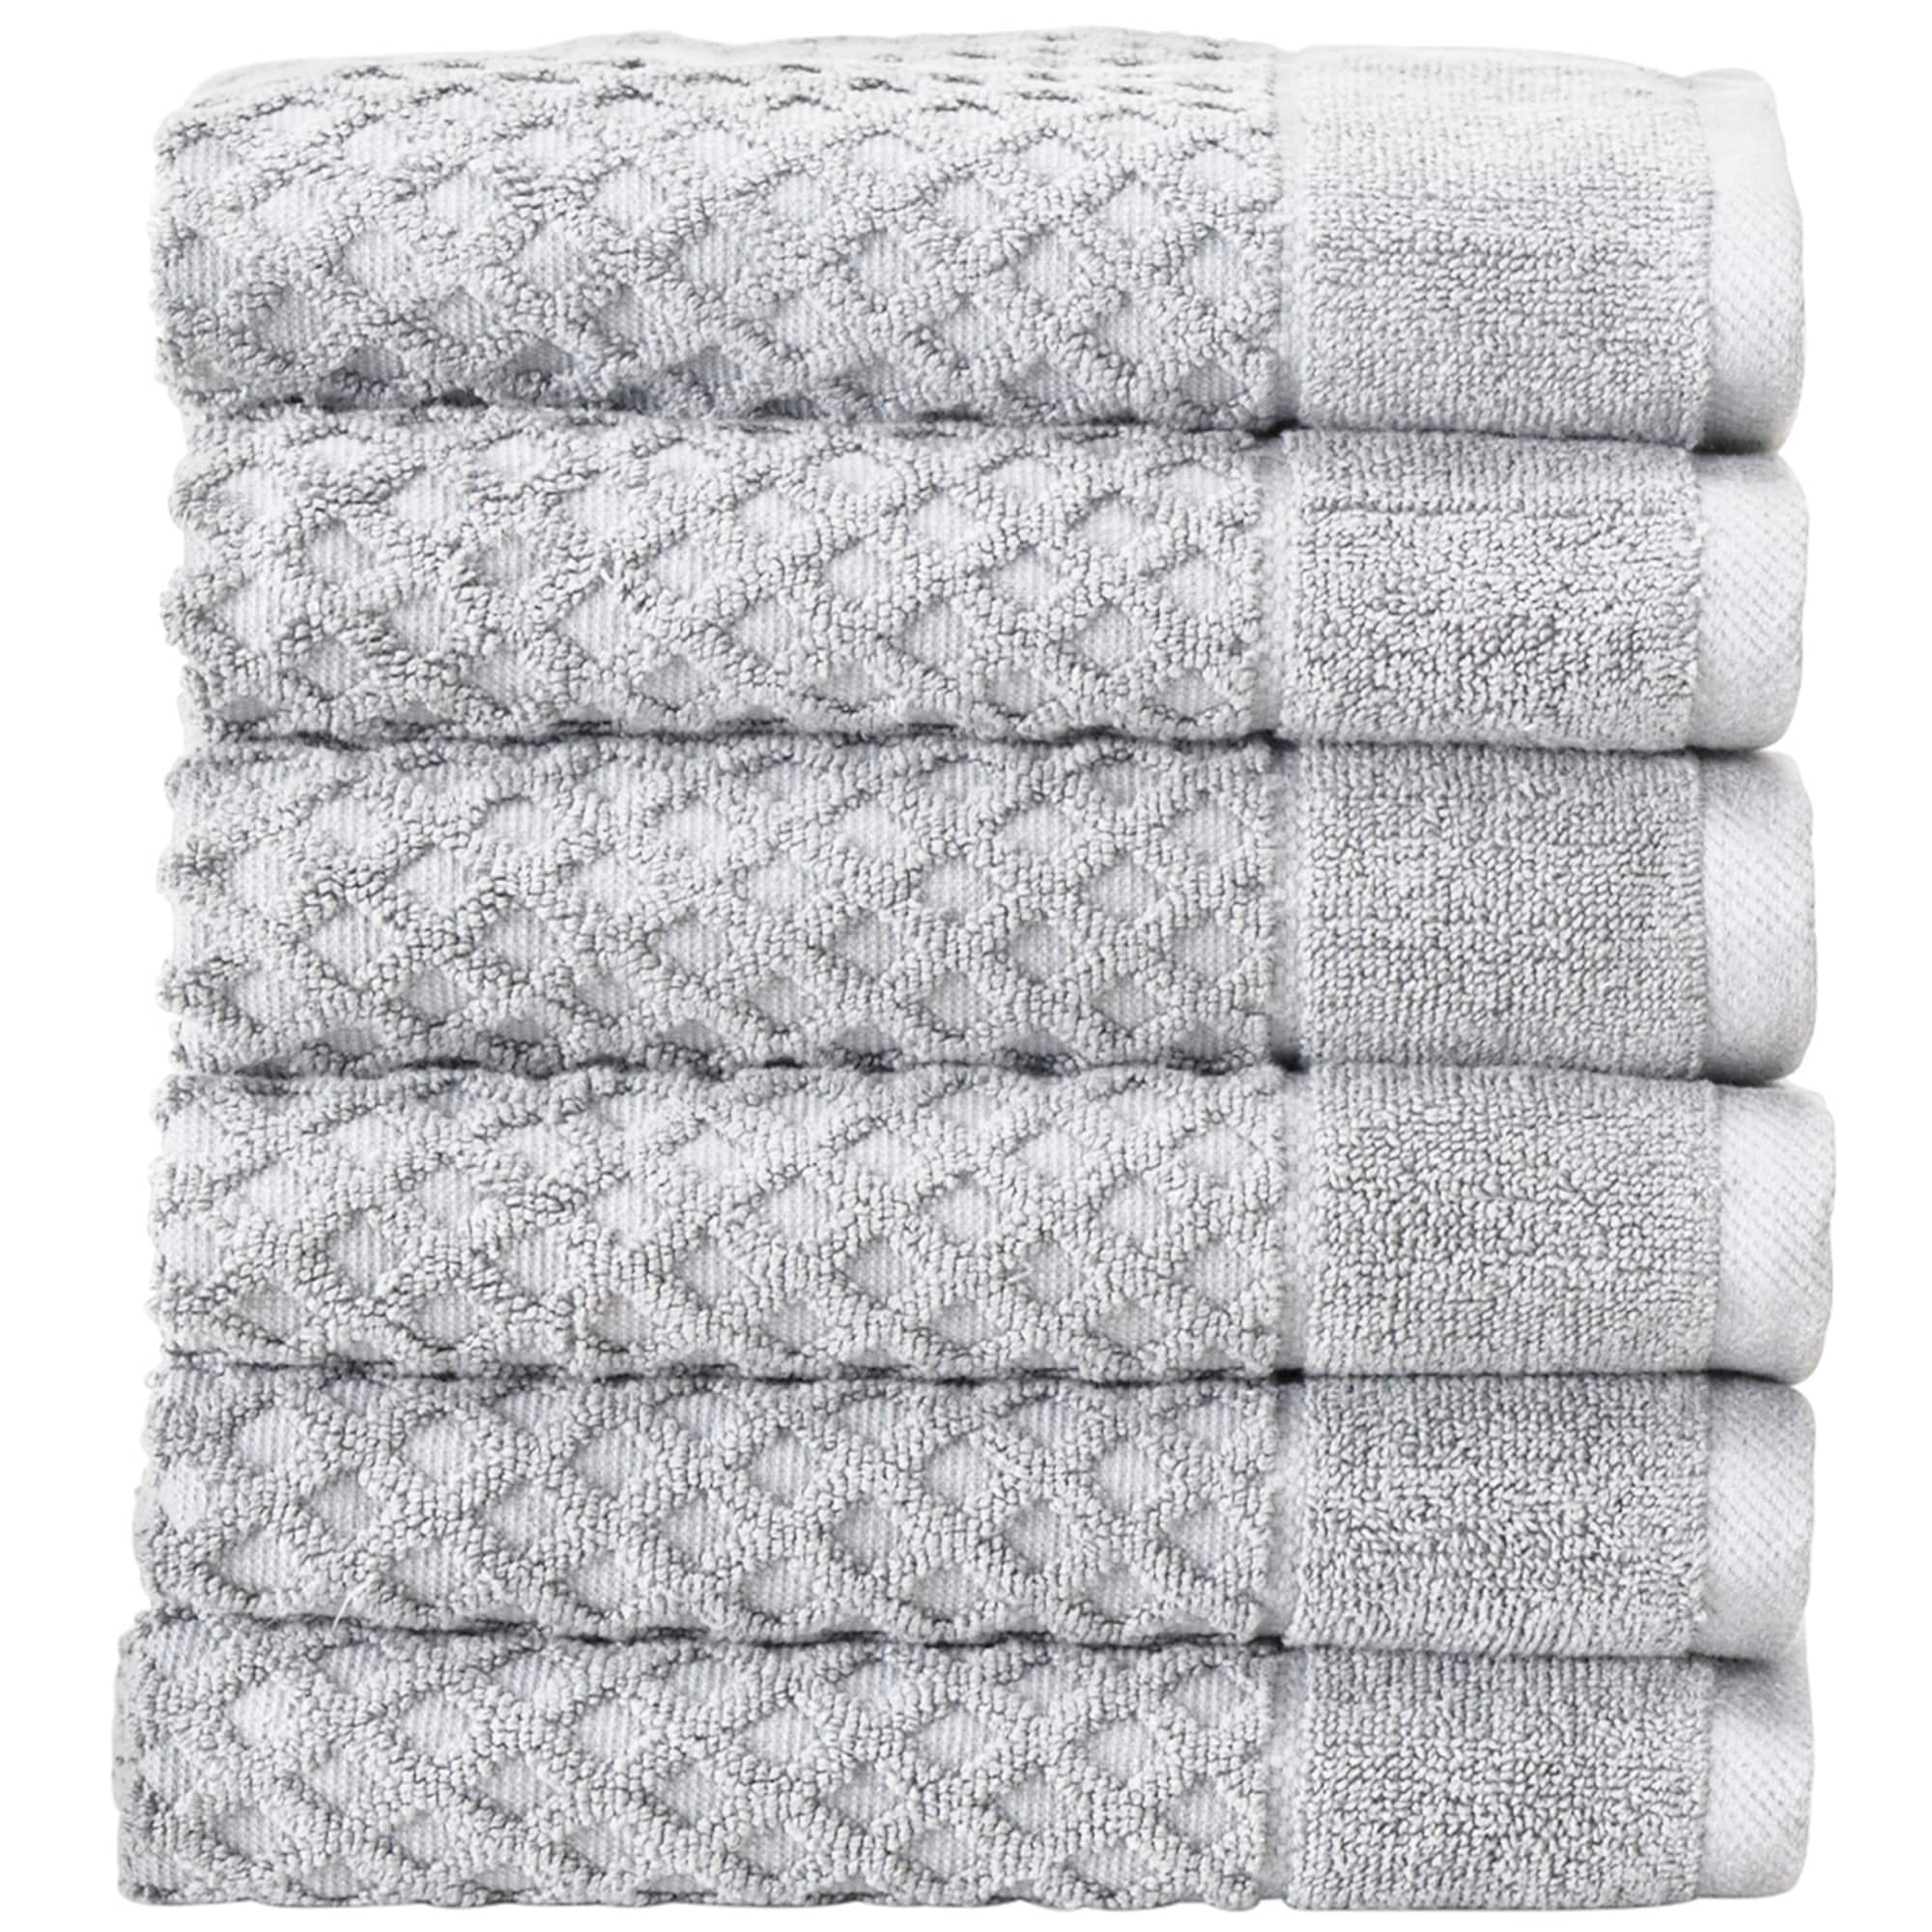 https://ak1.ostkcdn.com/images/products/is/images/direct/6fdd0fa9b1e8862fd7ffda487deeeded3797bd1a/Great-Bay-Home-Cotton-Diamond-Textured-Towel-Set.jpg